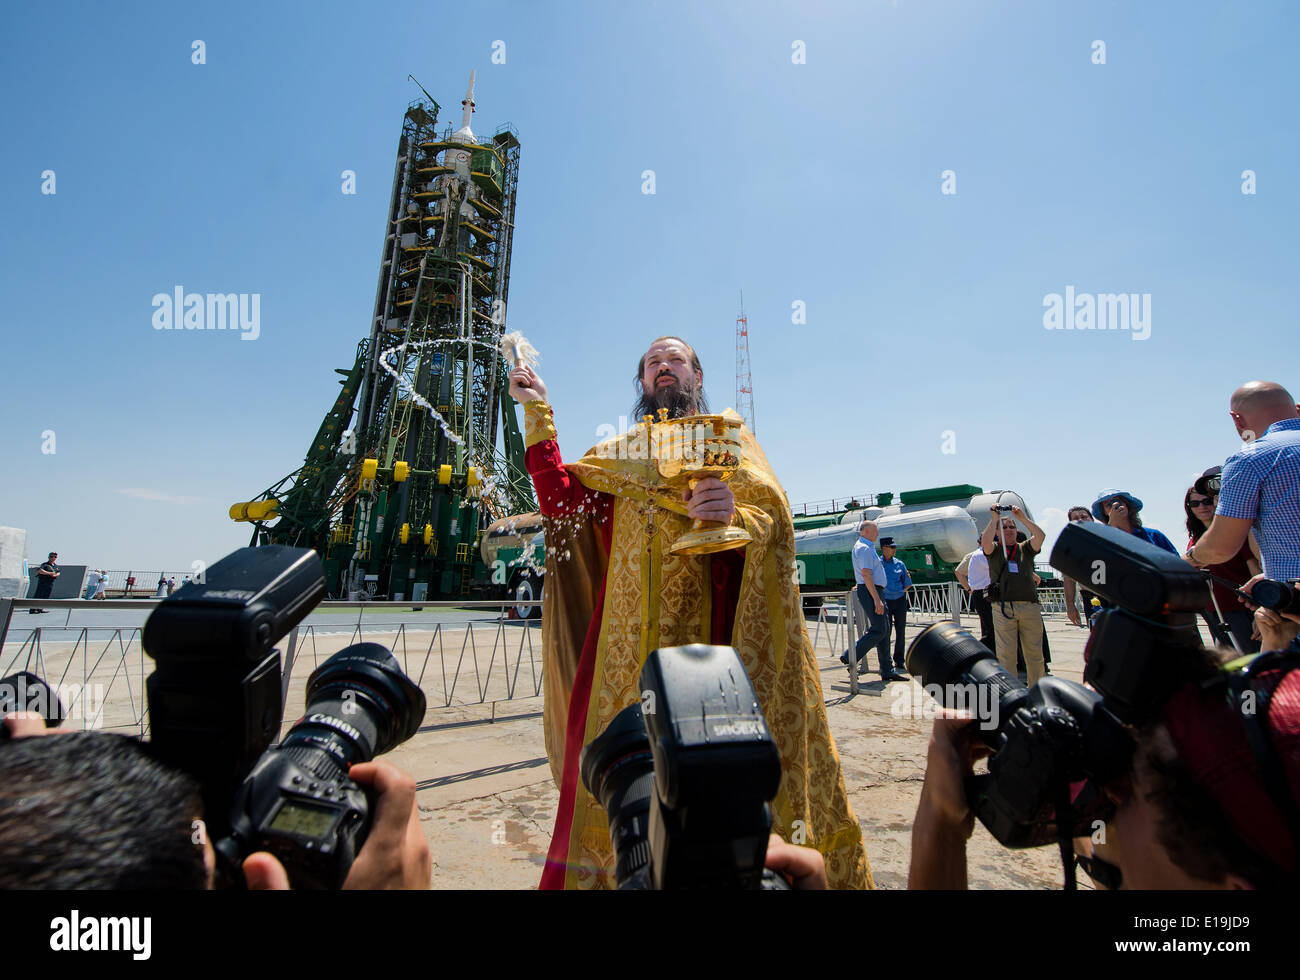 a-russian-orthodox-priest-blesses-the-soyuz-rocket-and-members-of-E19JD9.jpg